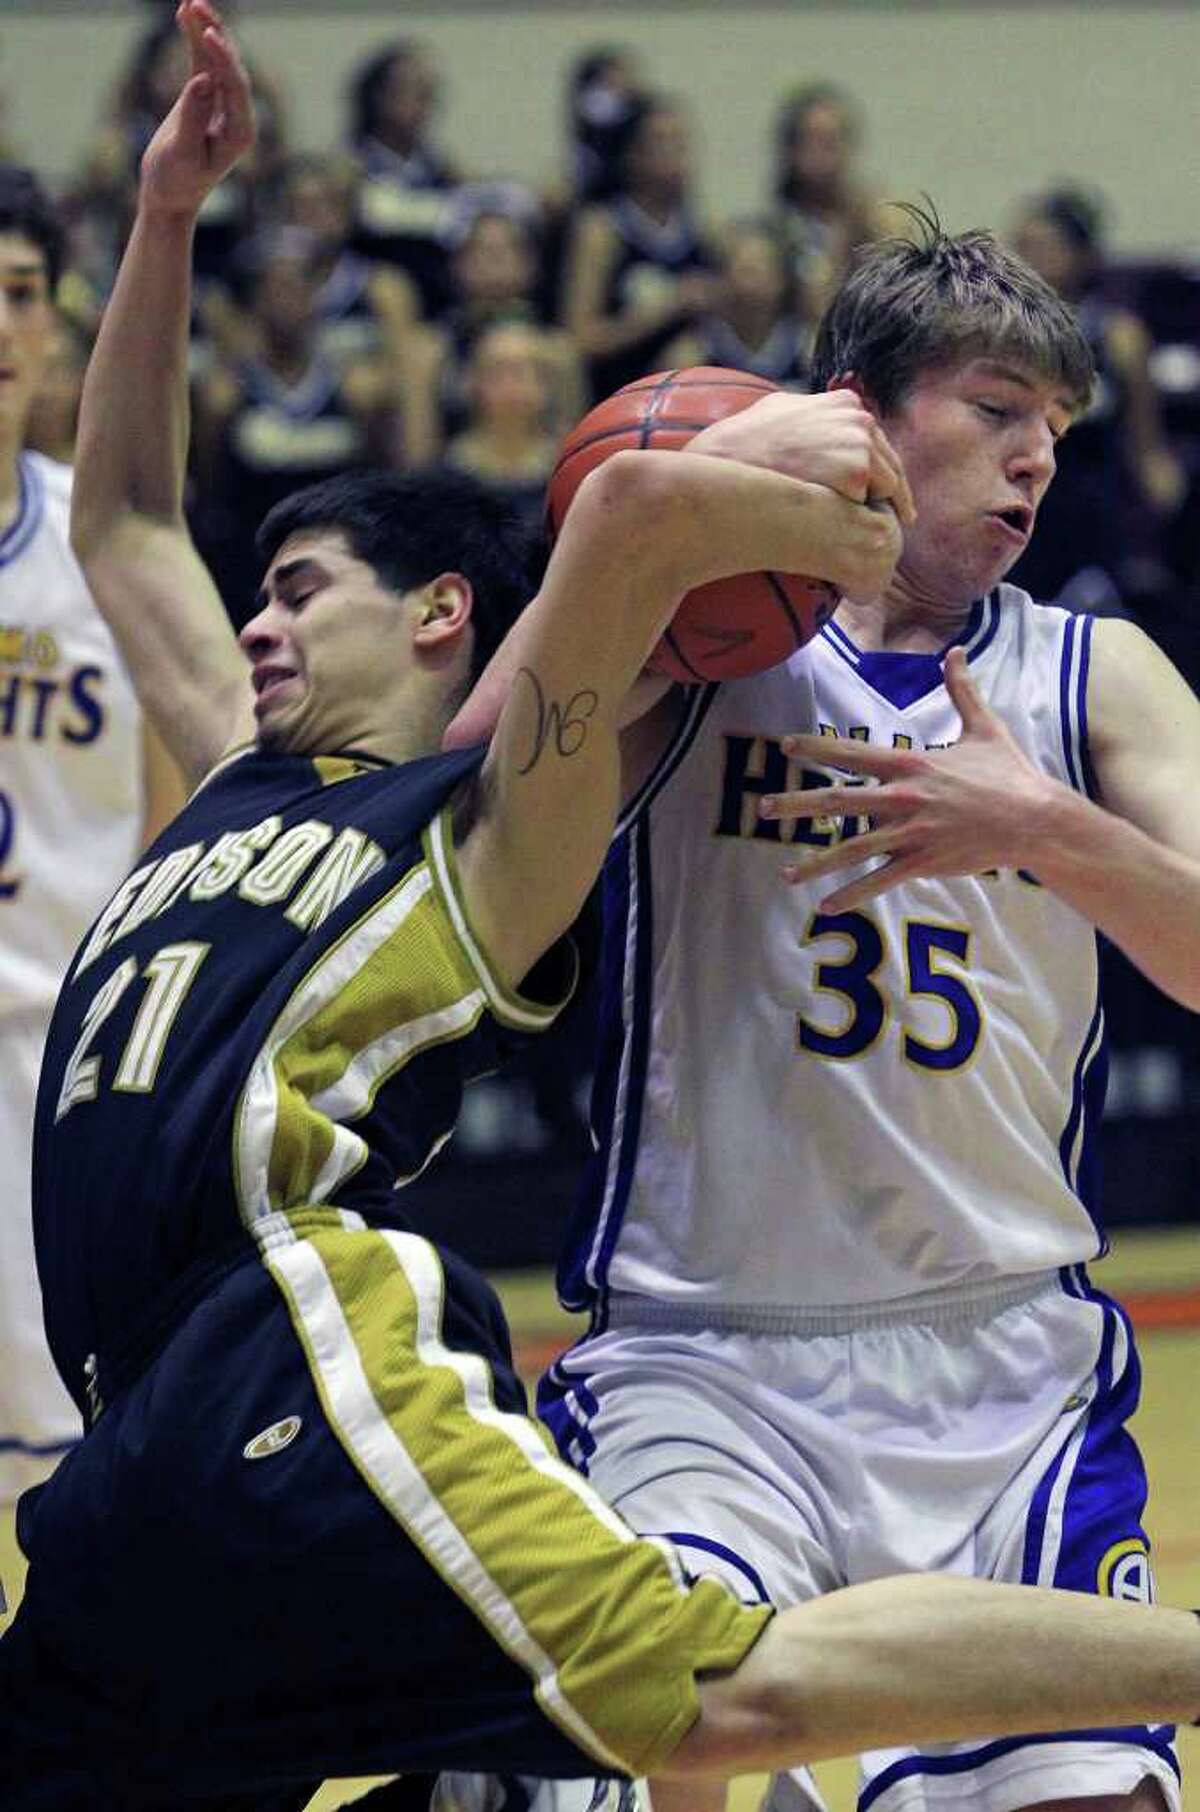 Marco Guerrero finds tough going in the lane in the second half as Wes Miller moves in to grab the ball as Alamo Heights beats Edison 50-39 in Region IV 4A finals at Littleton Gym on March 3, 2012 Tom Reel/ San Antonio Express-News